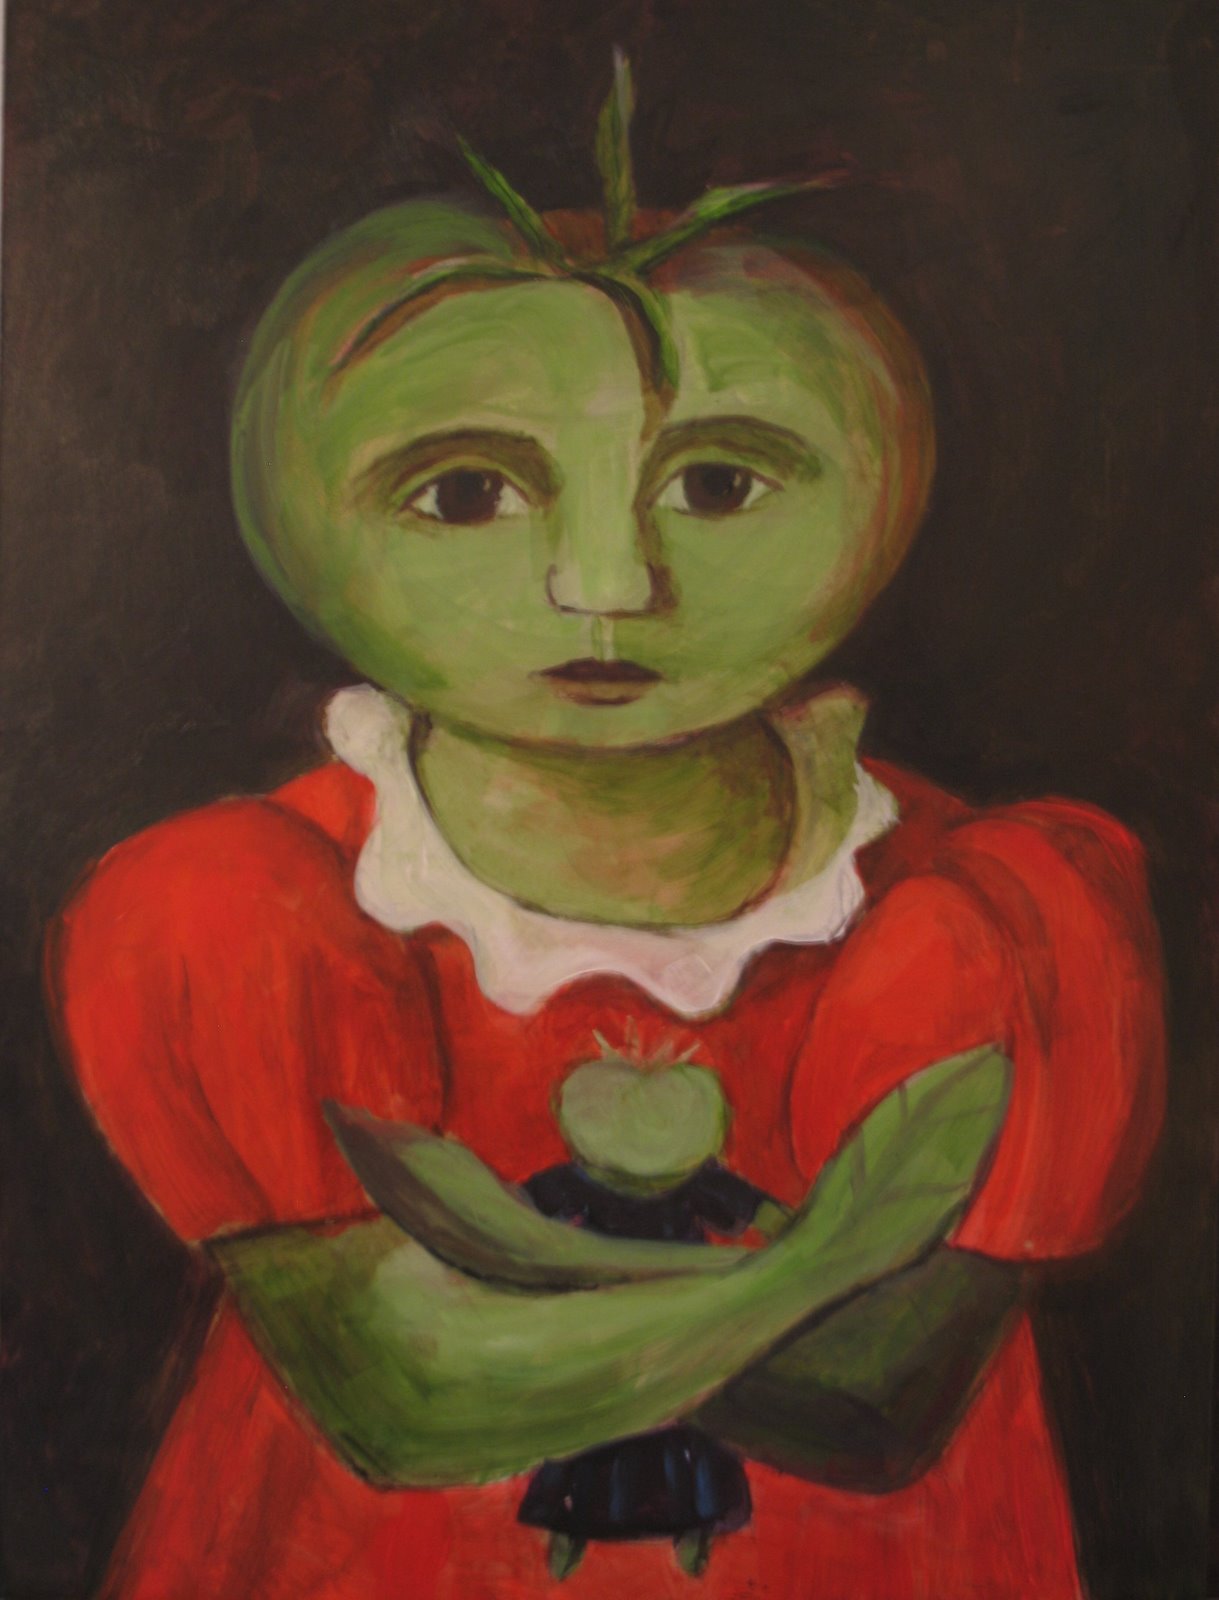 [Tomato+painting+gree+girl+in+red.jpg]